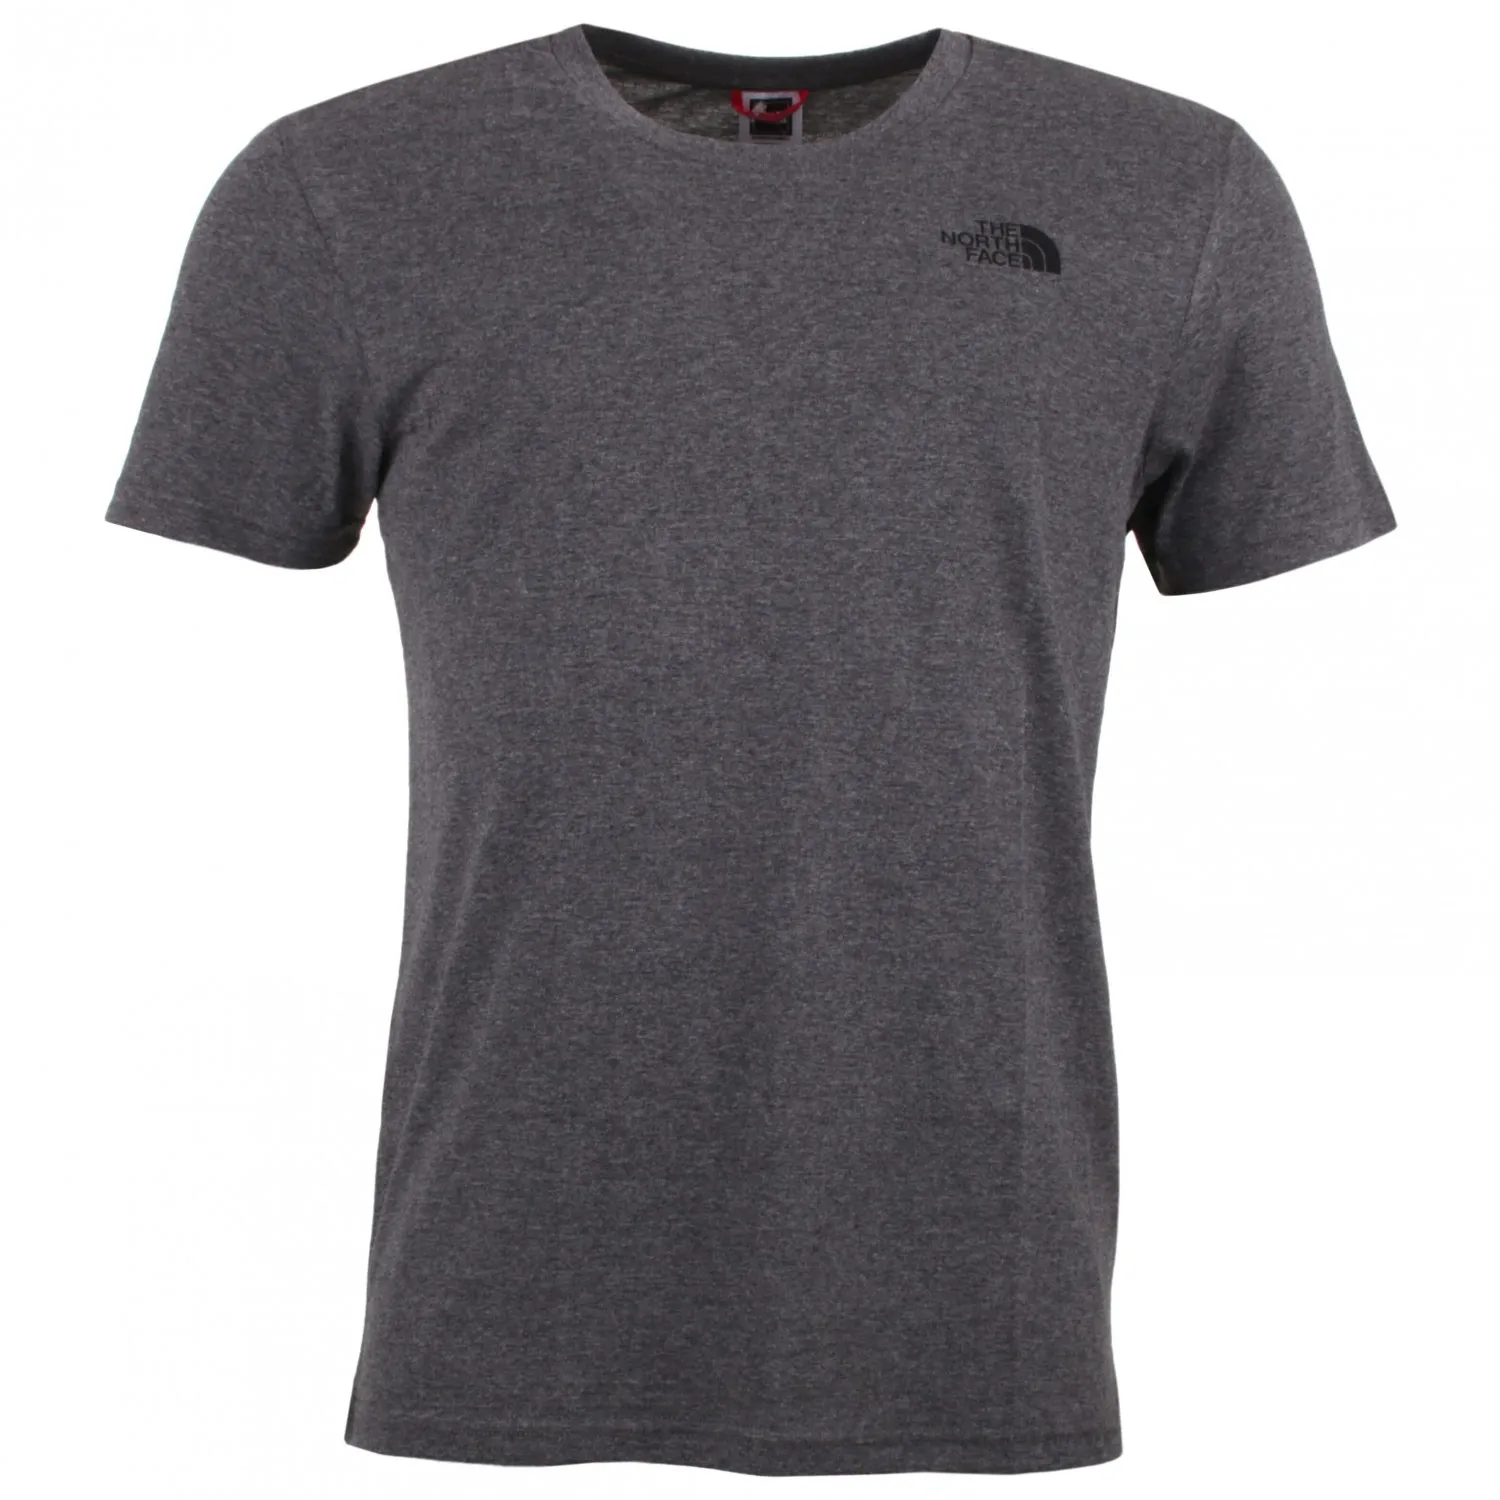 the-north-face-s-s-simple-dome-tee-t-shirt-bf_converted